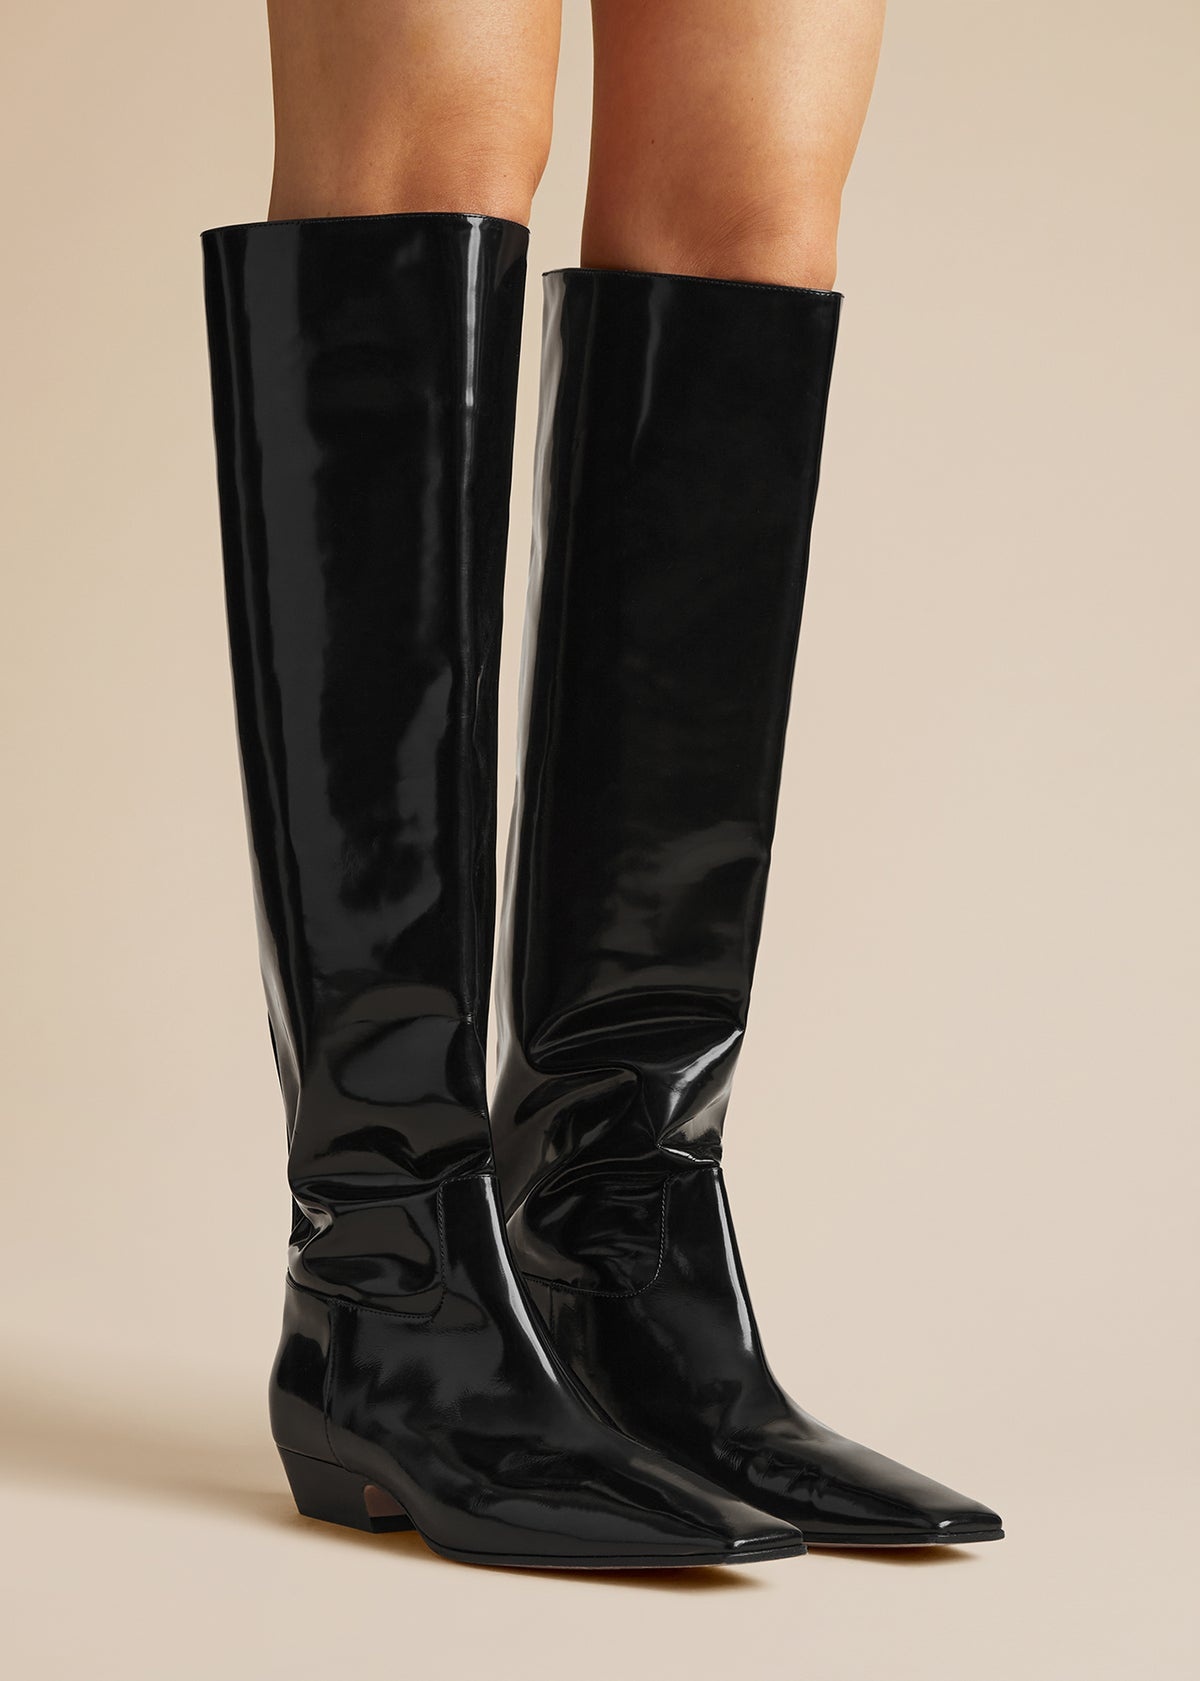 The Marfa Knee-High Boot in Black Brushed Leather - 4